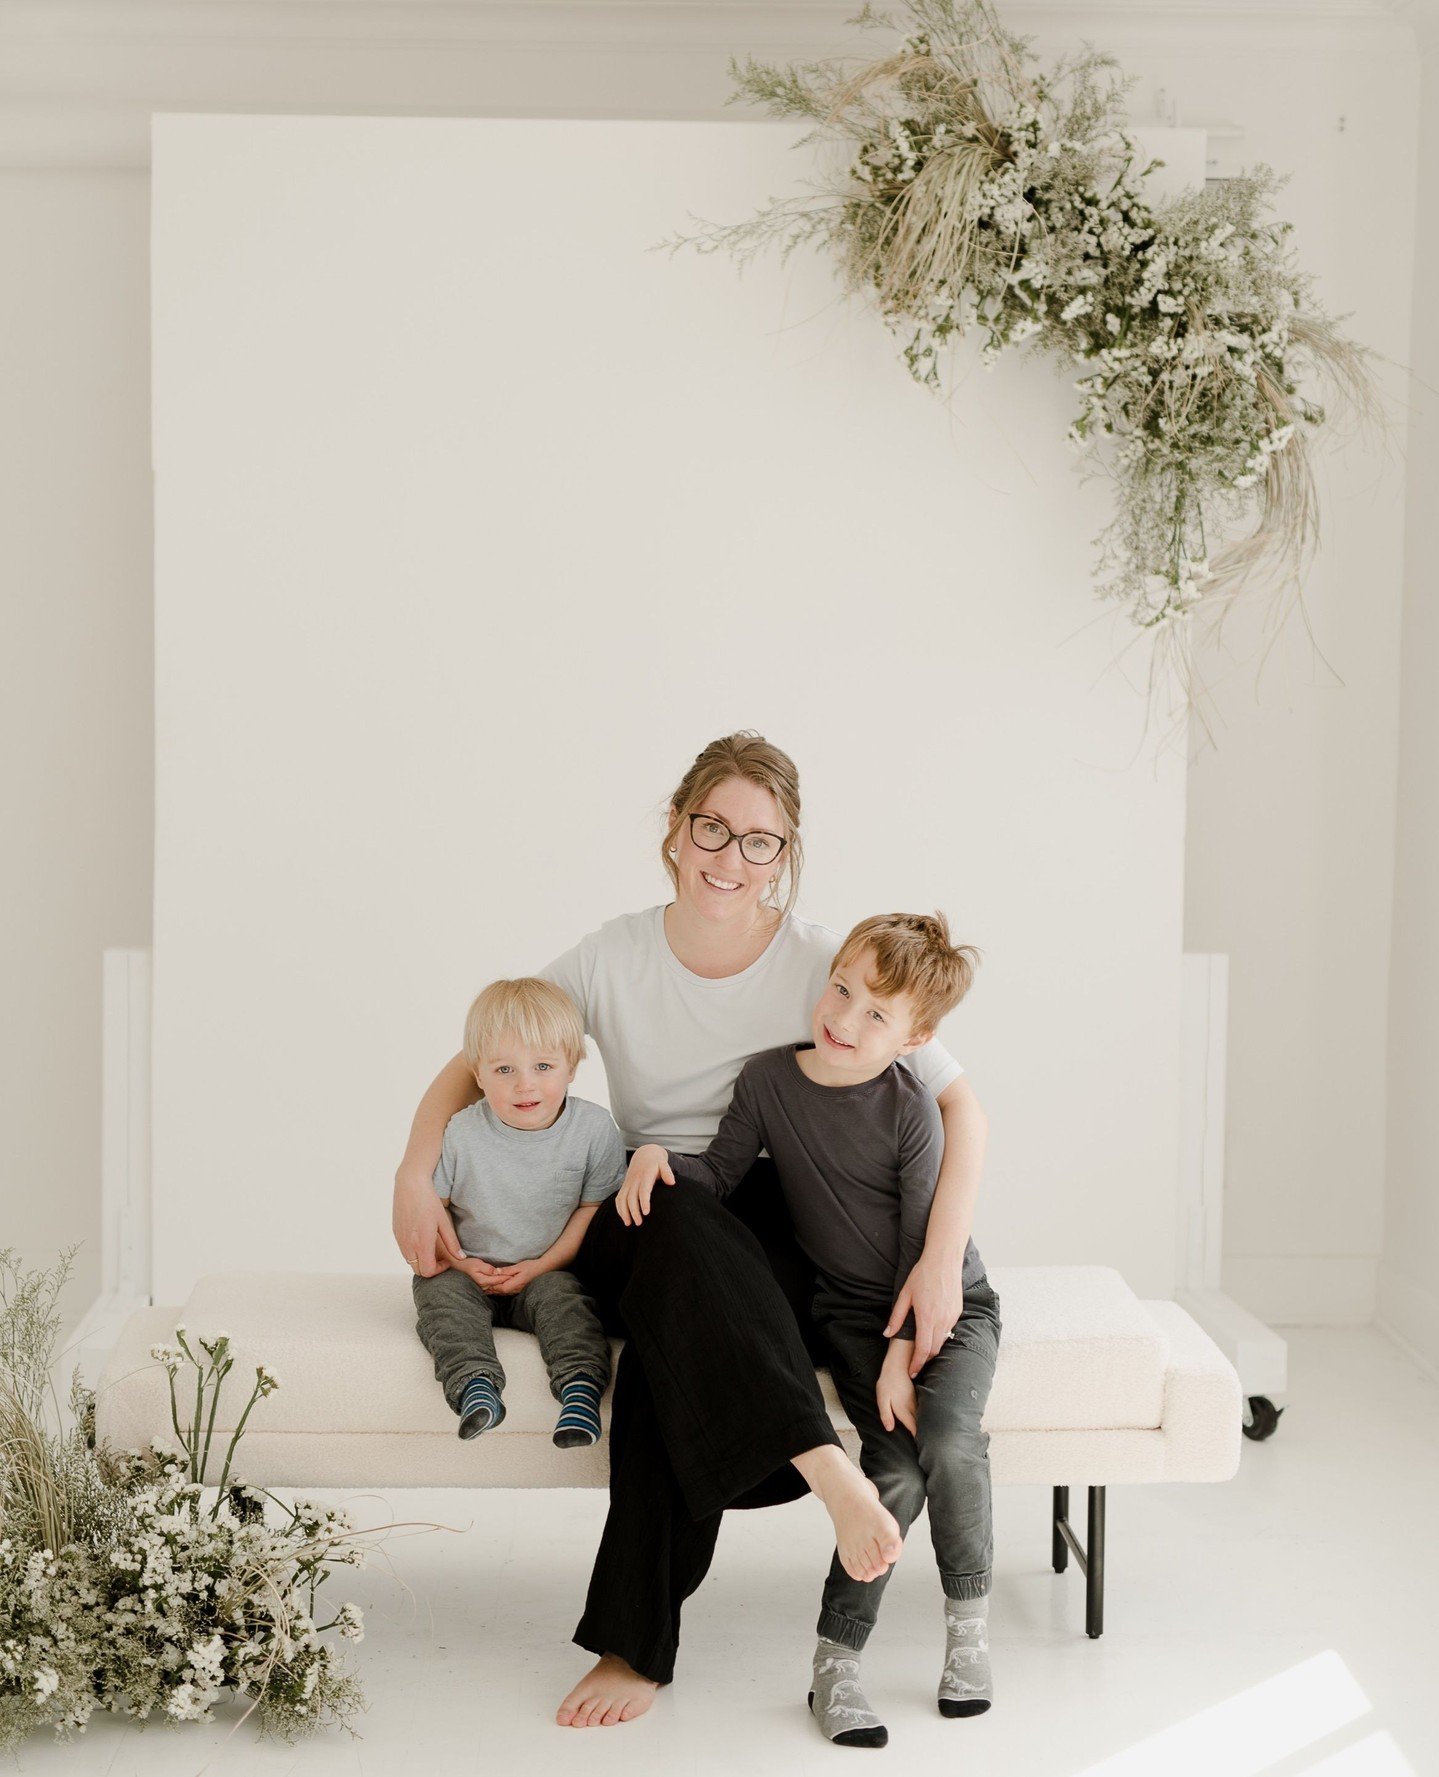 Mother's Day with the chaotic loves of my life 🤍⁠
⁠
Thank you @vanessarenaae for this sweet pic! The boys &quot;helped&quot; me set up the florals for her Mother's Day minis a few weeks ago...I can't say they were genuinely helpful but I think it's 